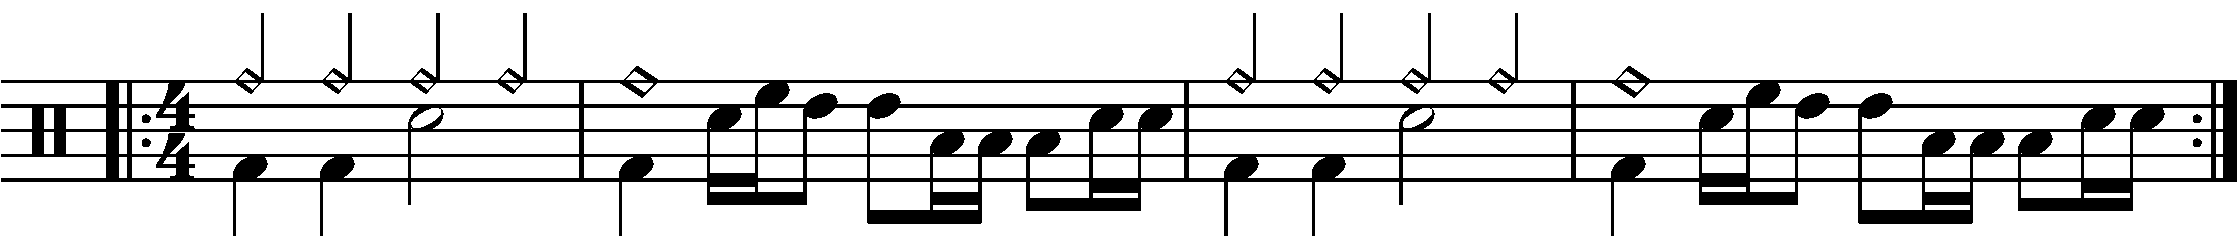 A repeated two bar phrase using simple rhythmic fills.